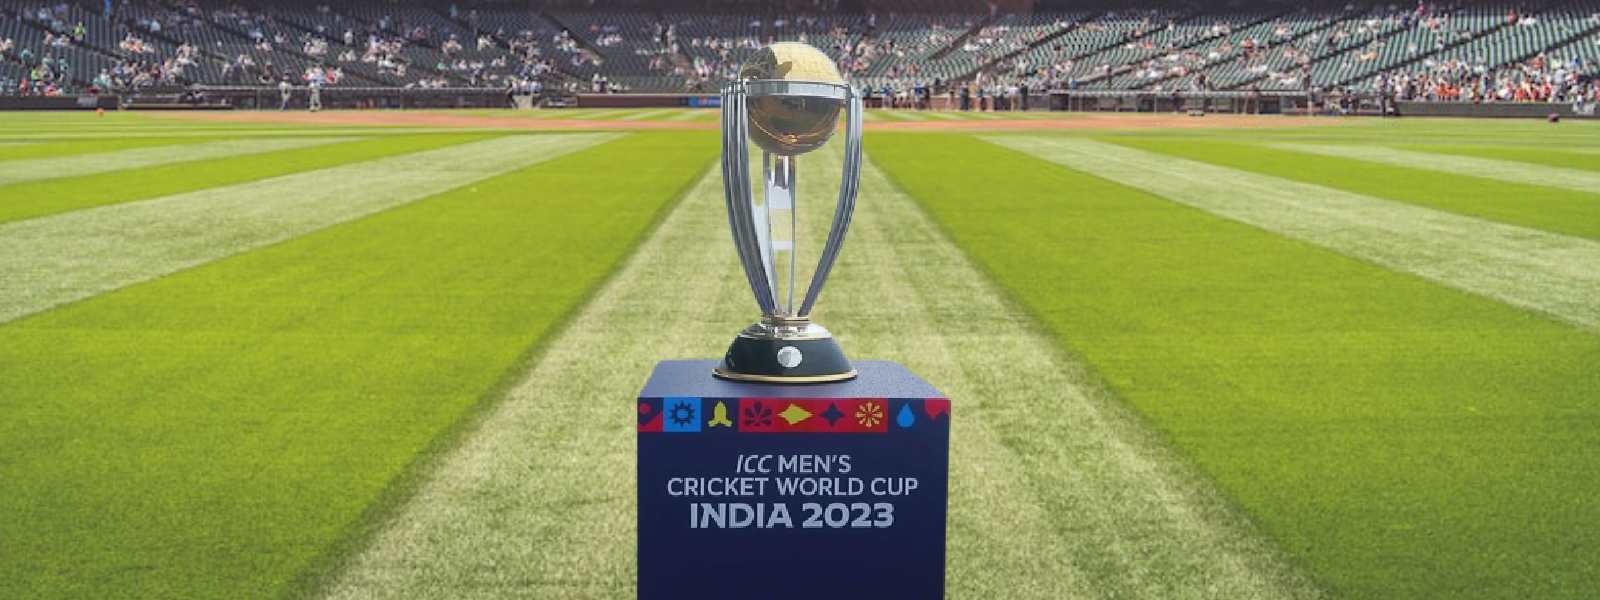 ICC Cricket World Cup Trophy in Colombo today (14)